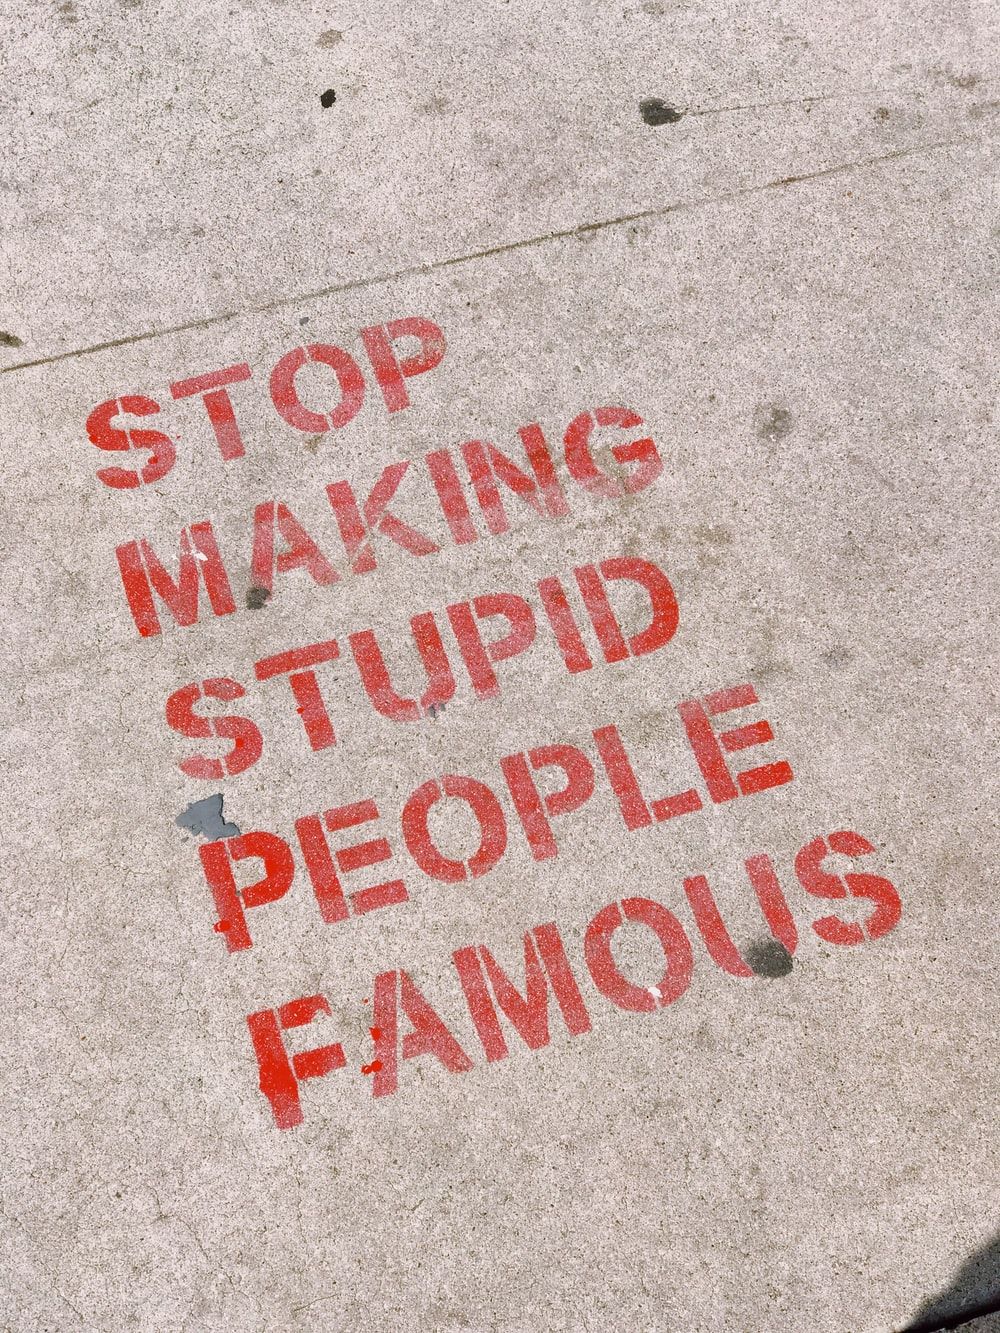 Stupid People Picture. Download Free Image